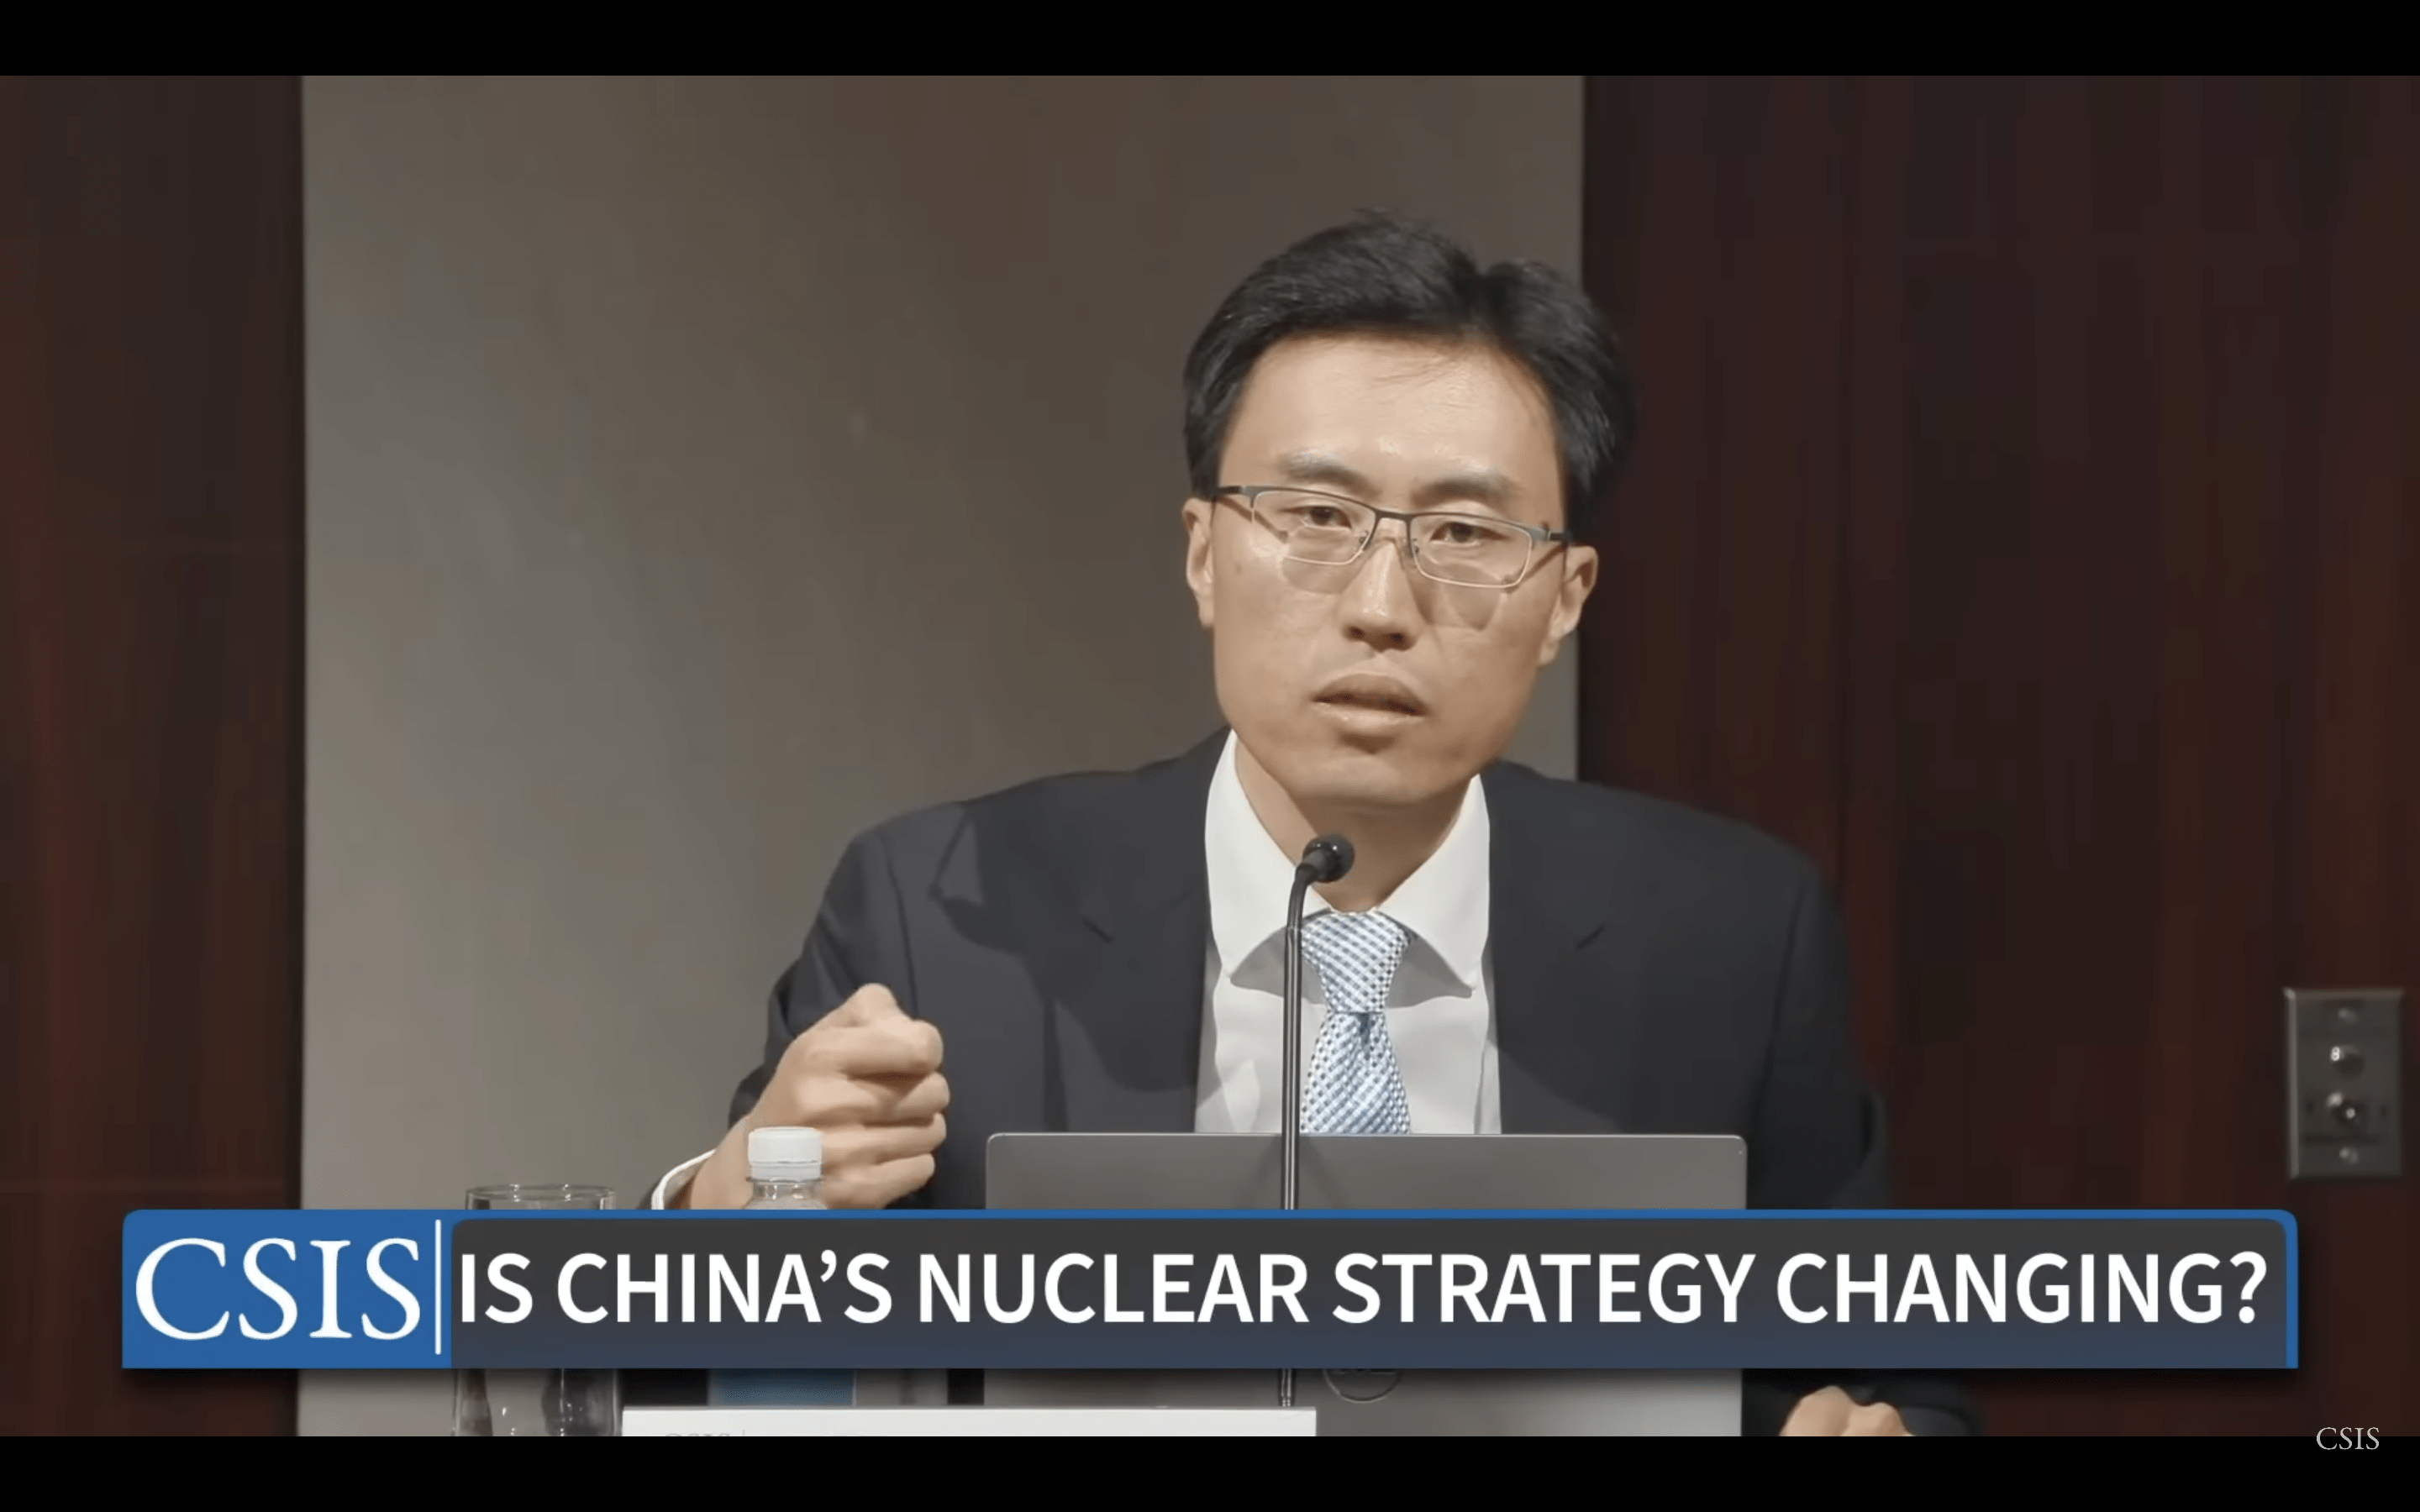 China’s Accelerated Expansion of its Nuclear Arsenal